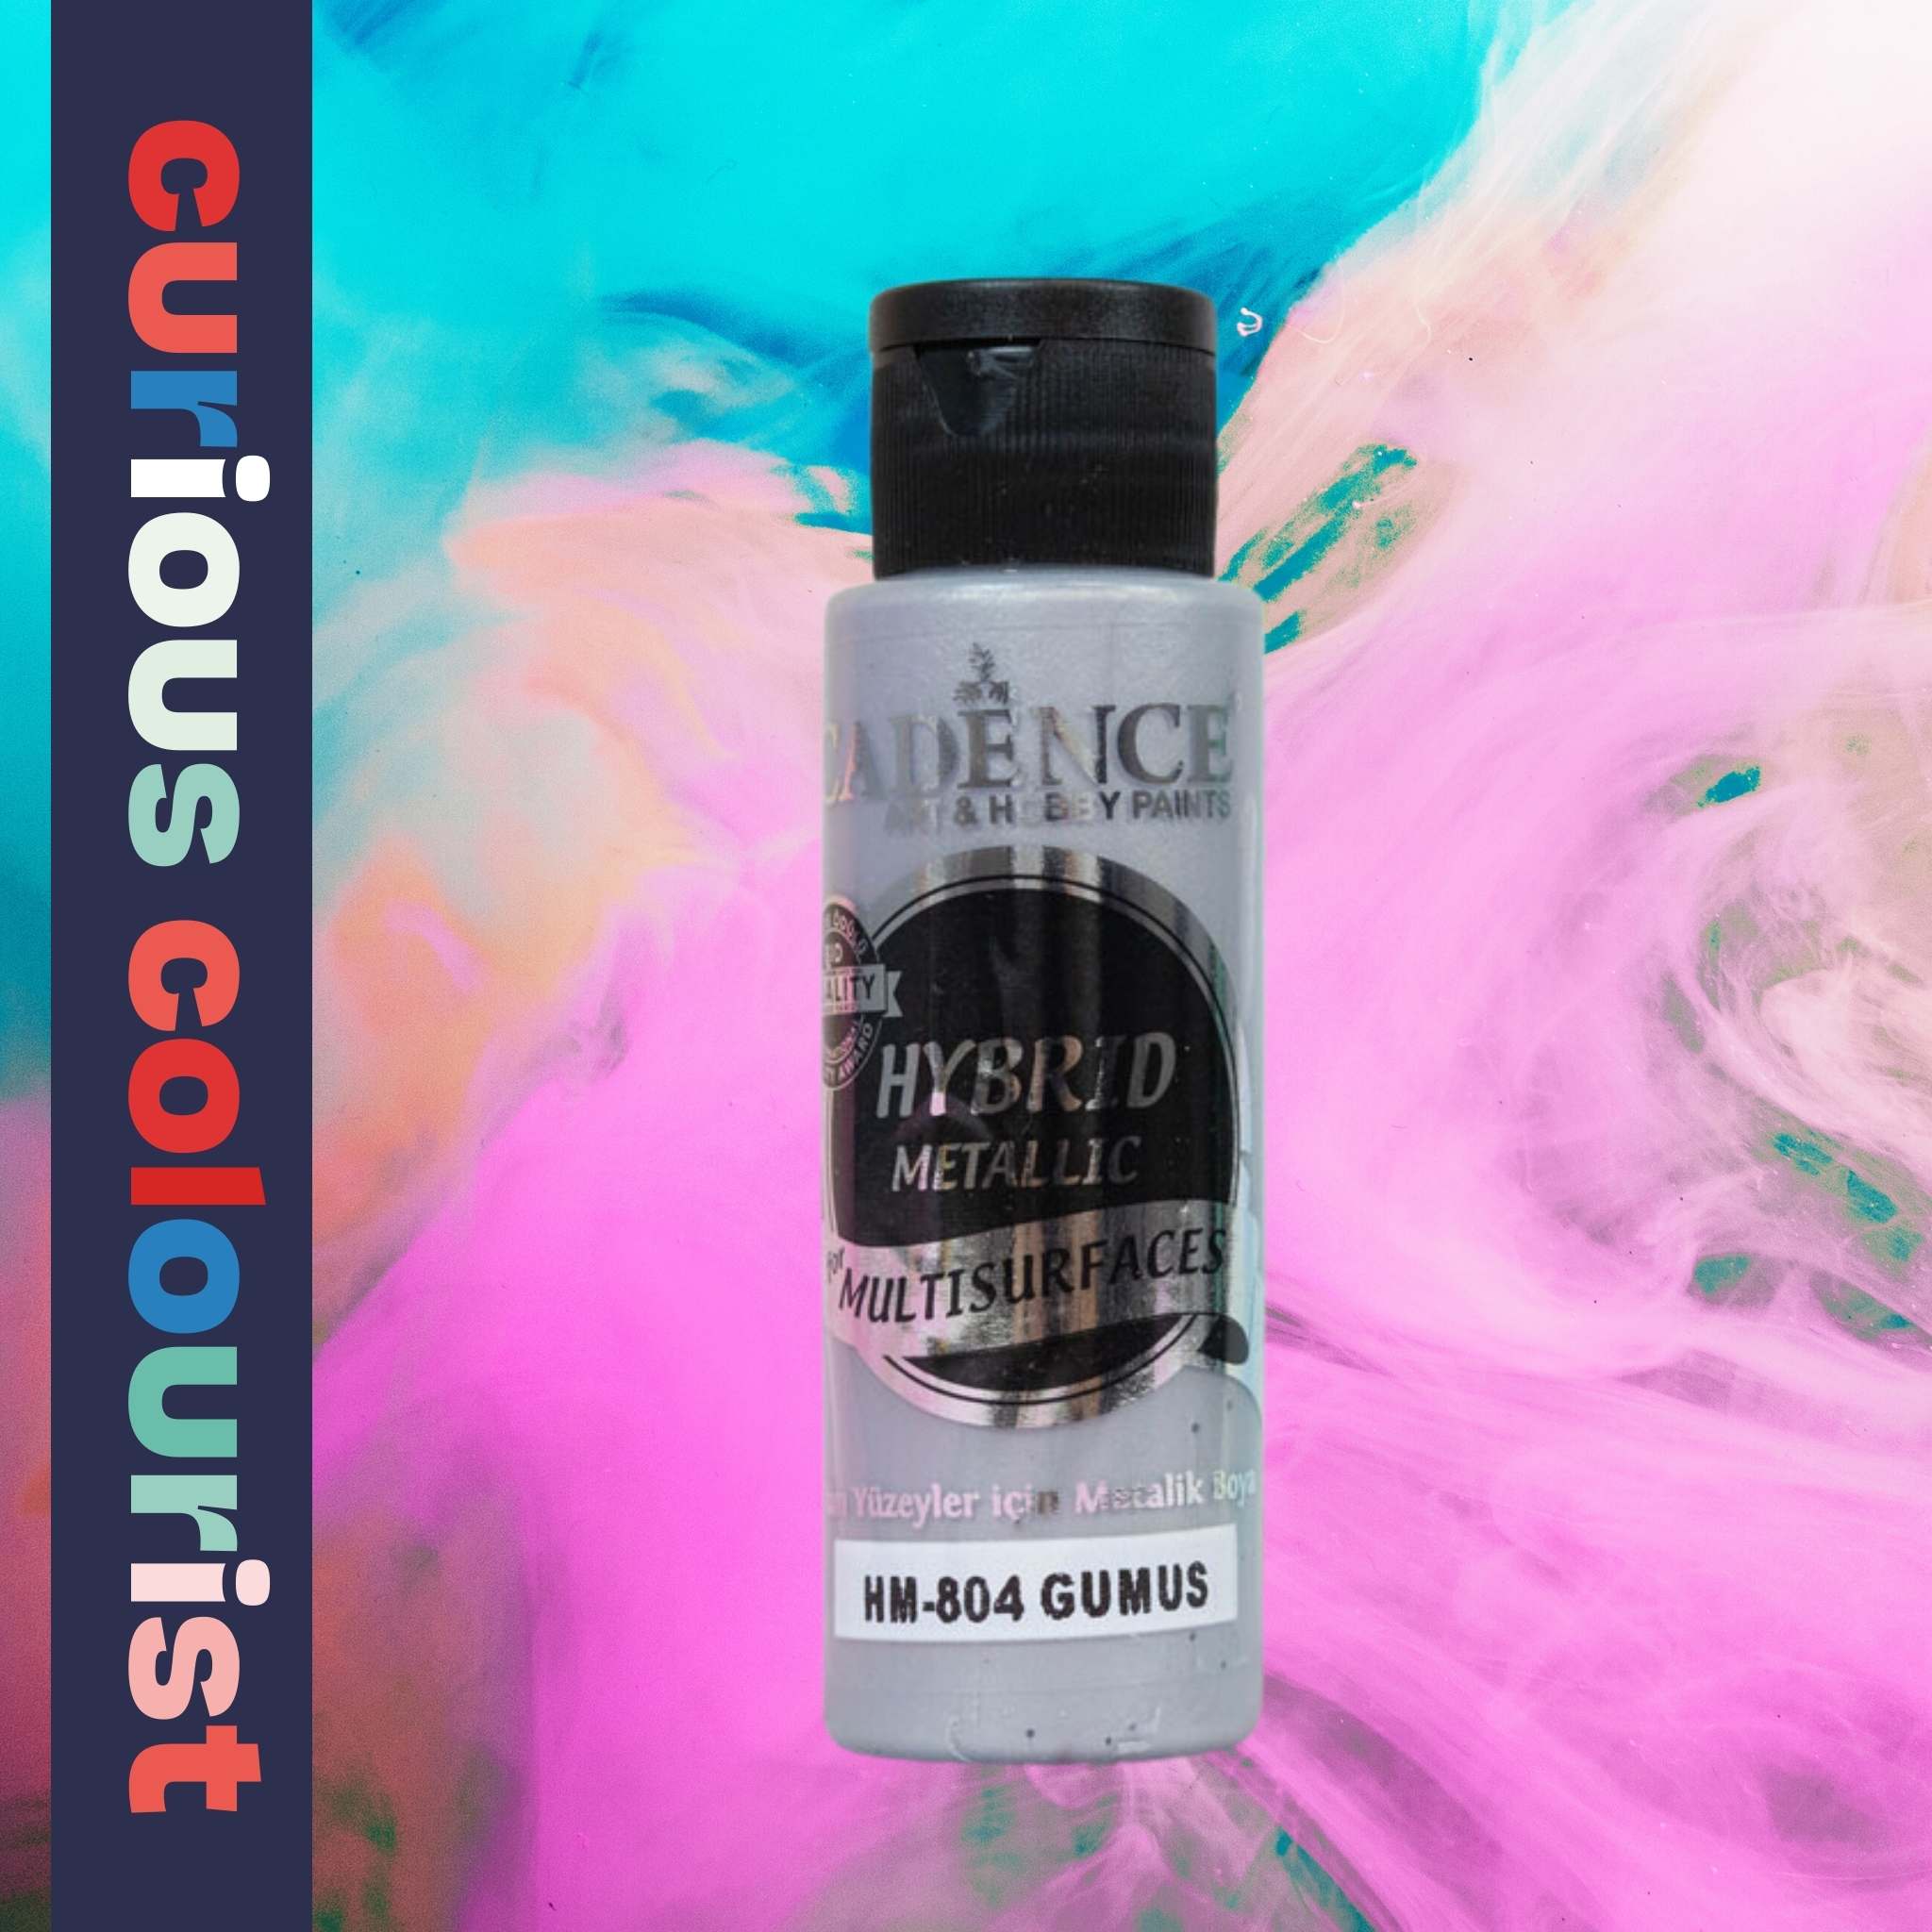 Silver Satin effect metallic paint from Cadence, use for leather craft - make your leather projects pop with the addition of metallic effects, painting on leather to add highlights and shimmer.